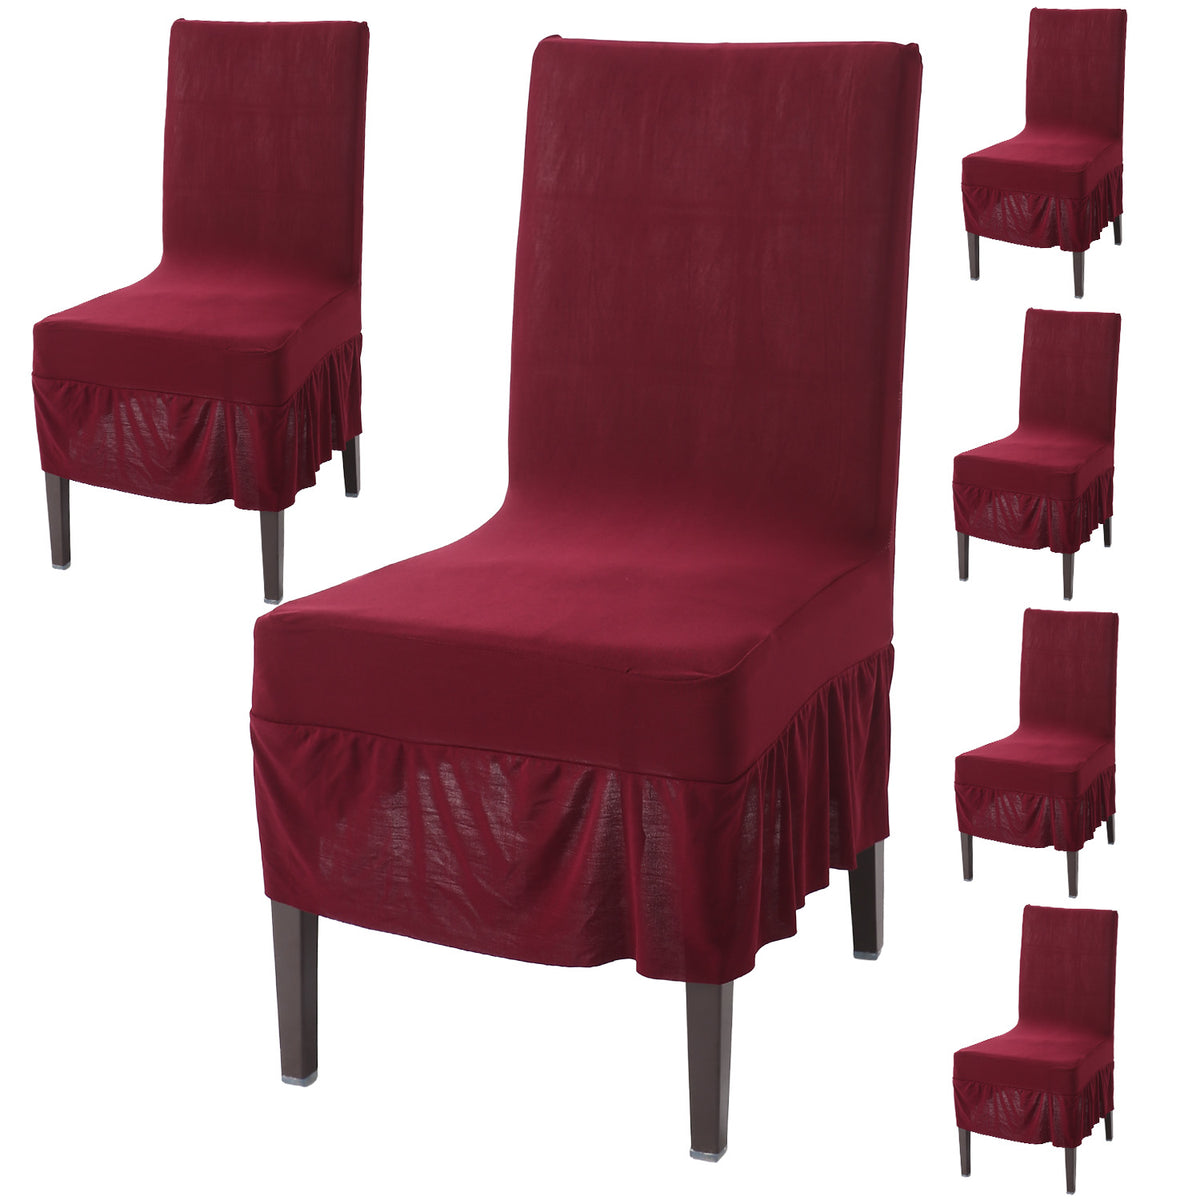 Elastic Stretchable Dining Chair Cover with Frill, Maroon